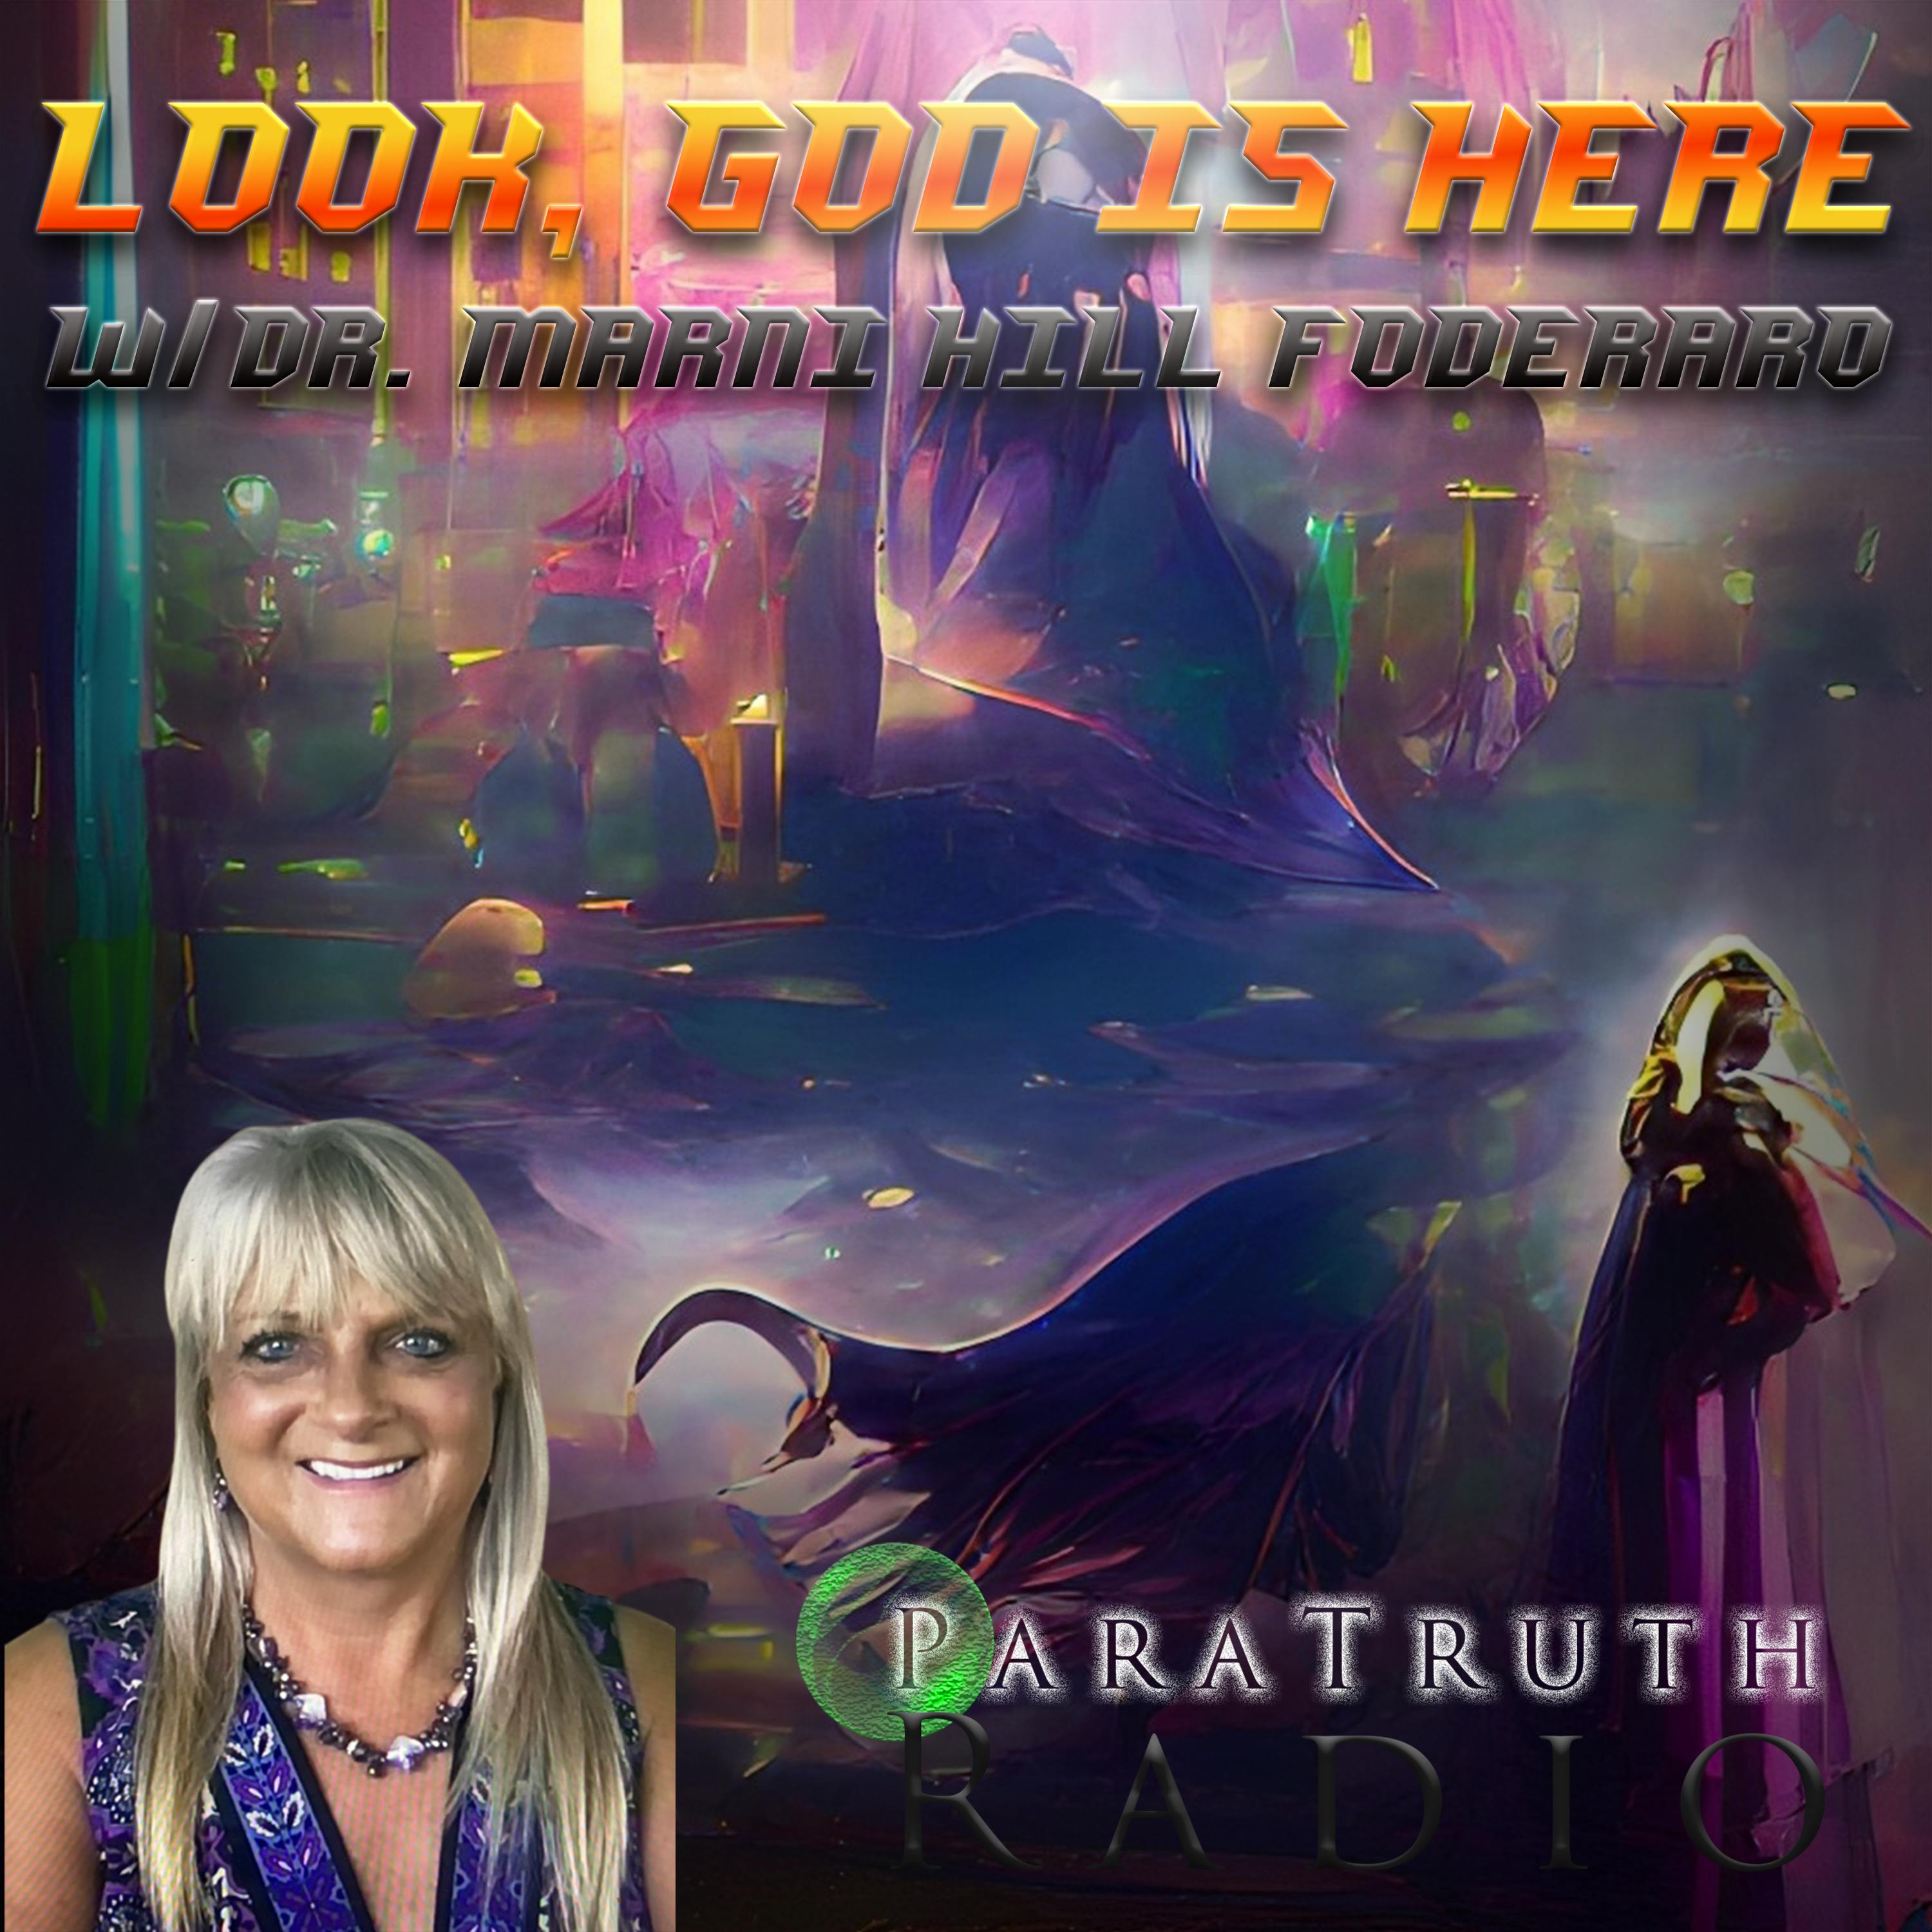 Look, God is Here w/Dr. Marni Hill Foderaro Image